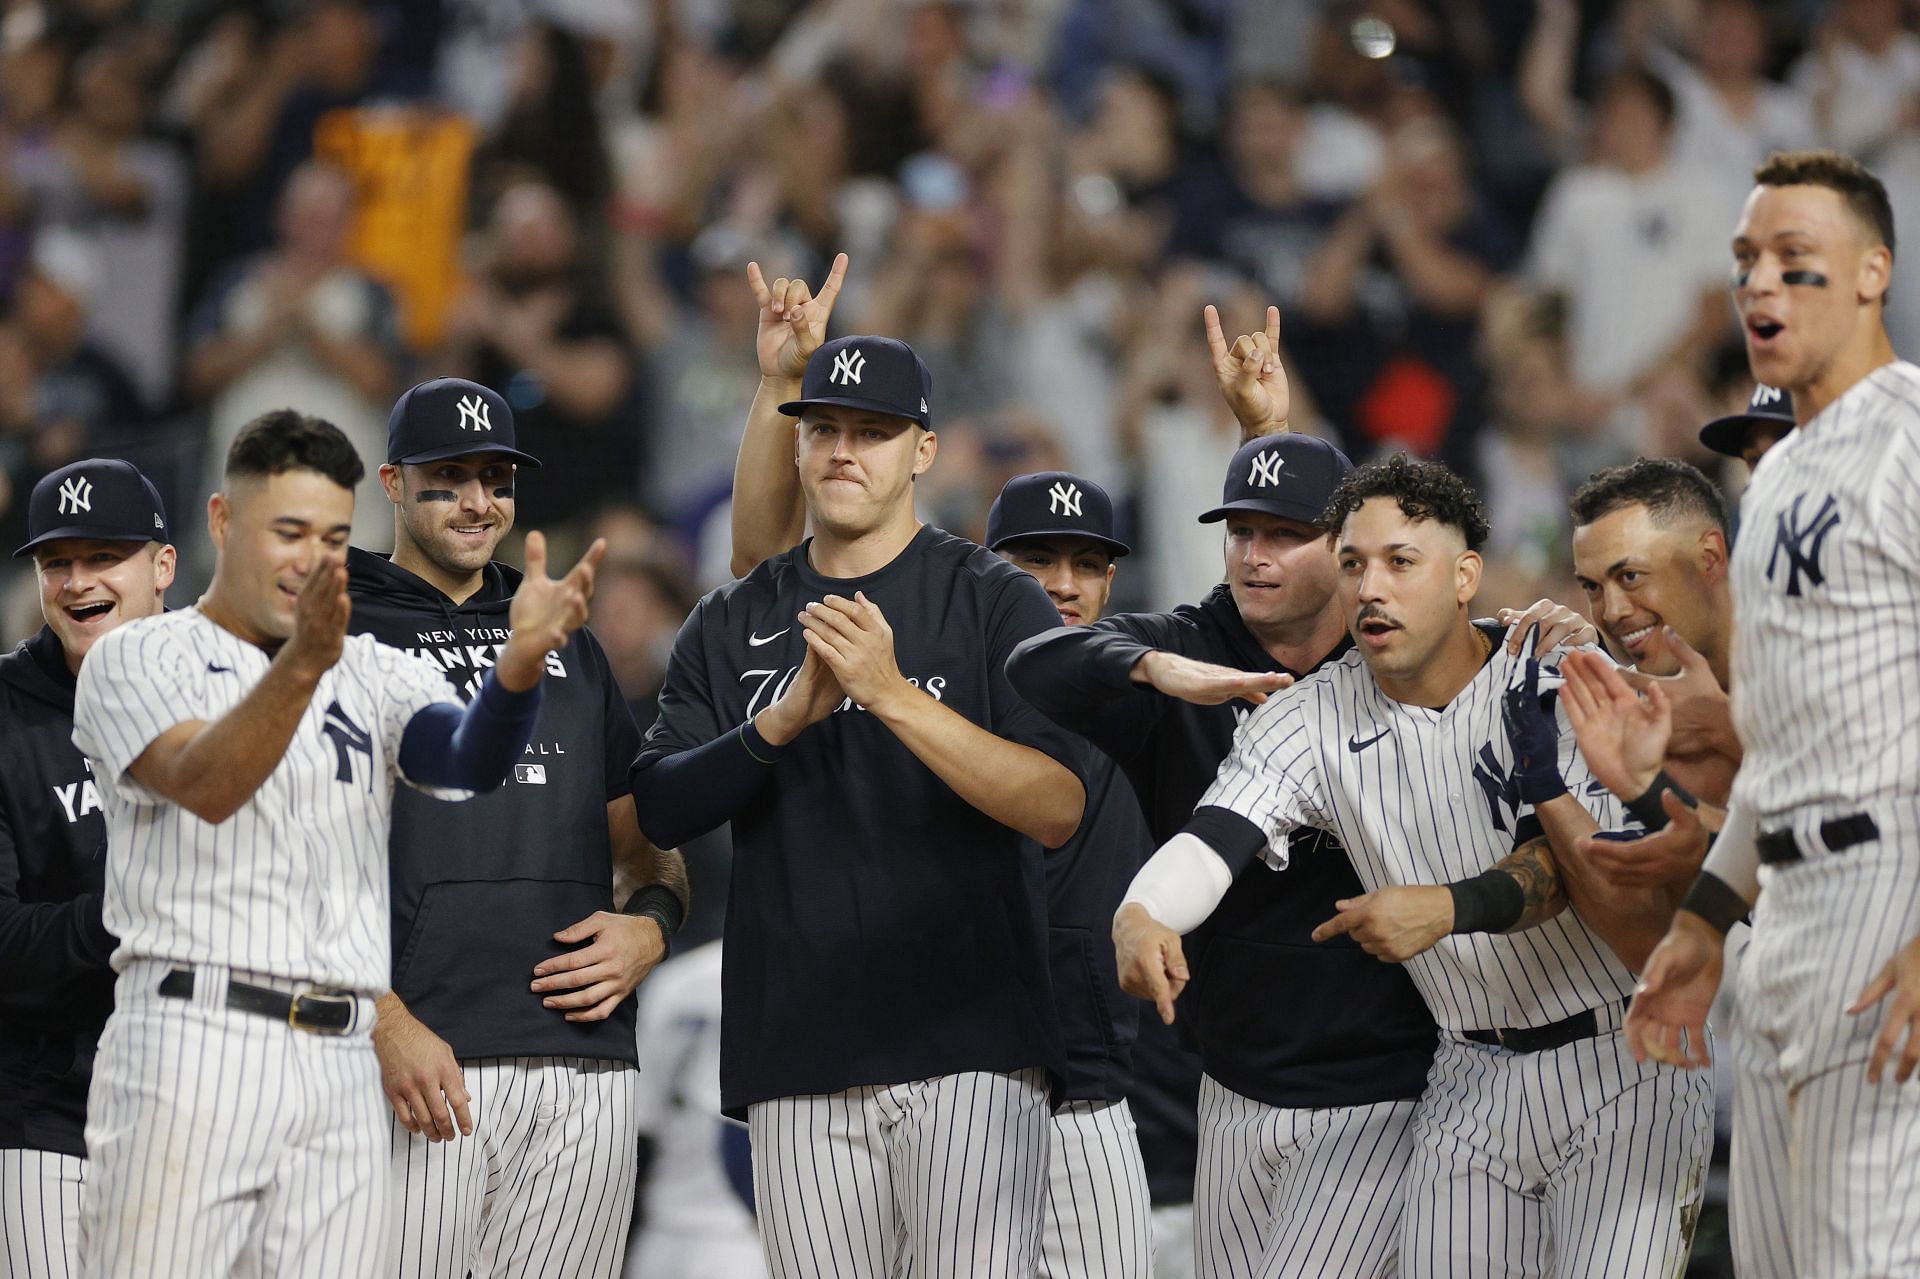 Yankees World Series wins: Which team is the best of all?